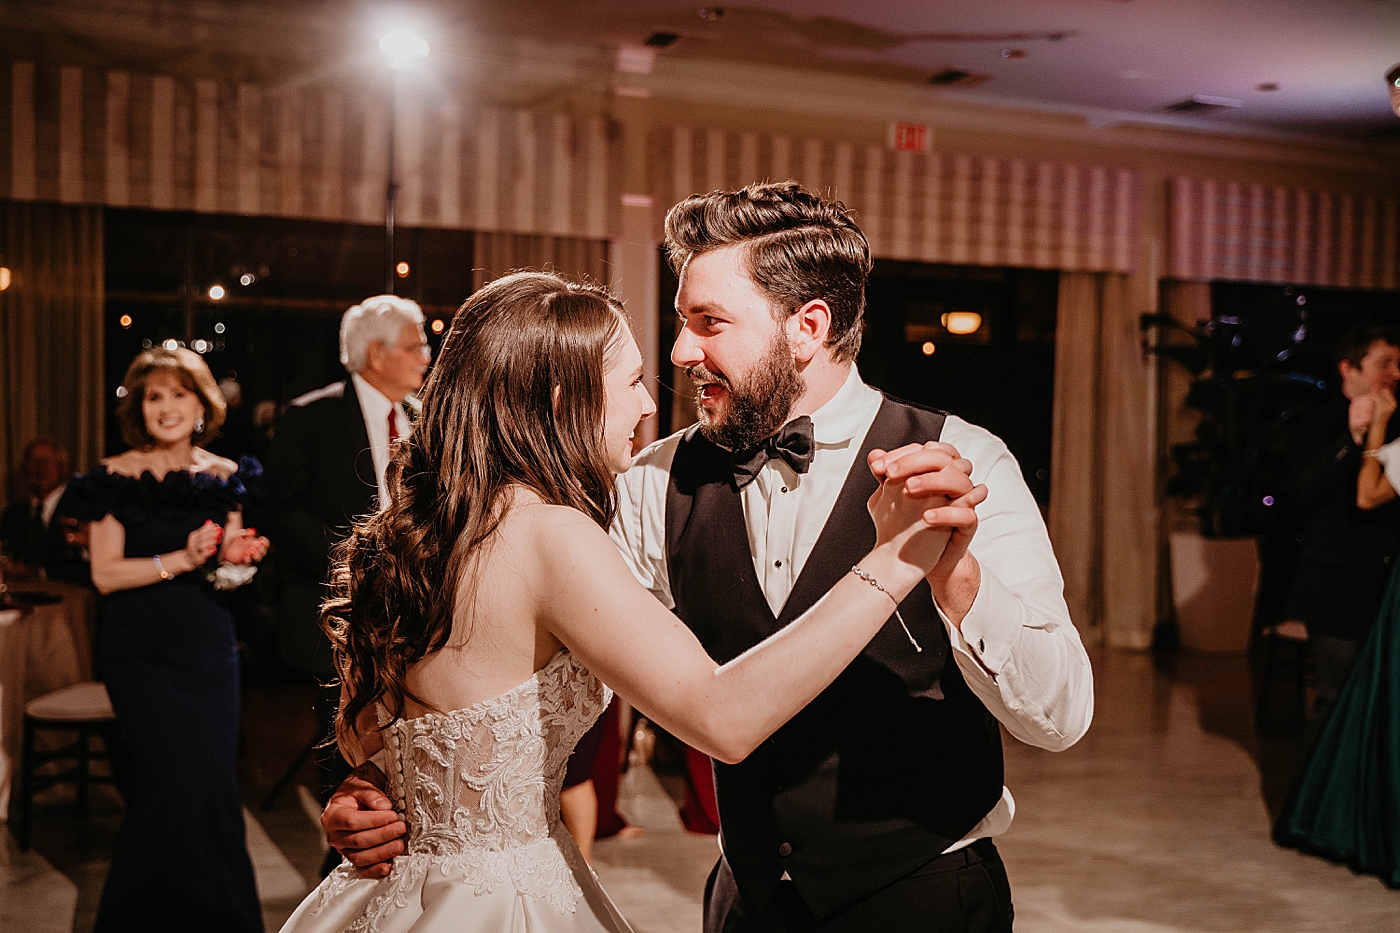 Bride and Groom dancing at reception Breakers West Wedding Photography captured by South Florida Wedding Photographer Krystal Capone Photography 